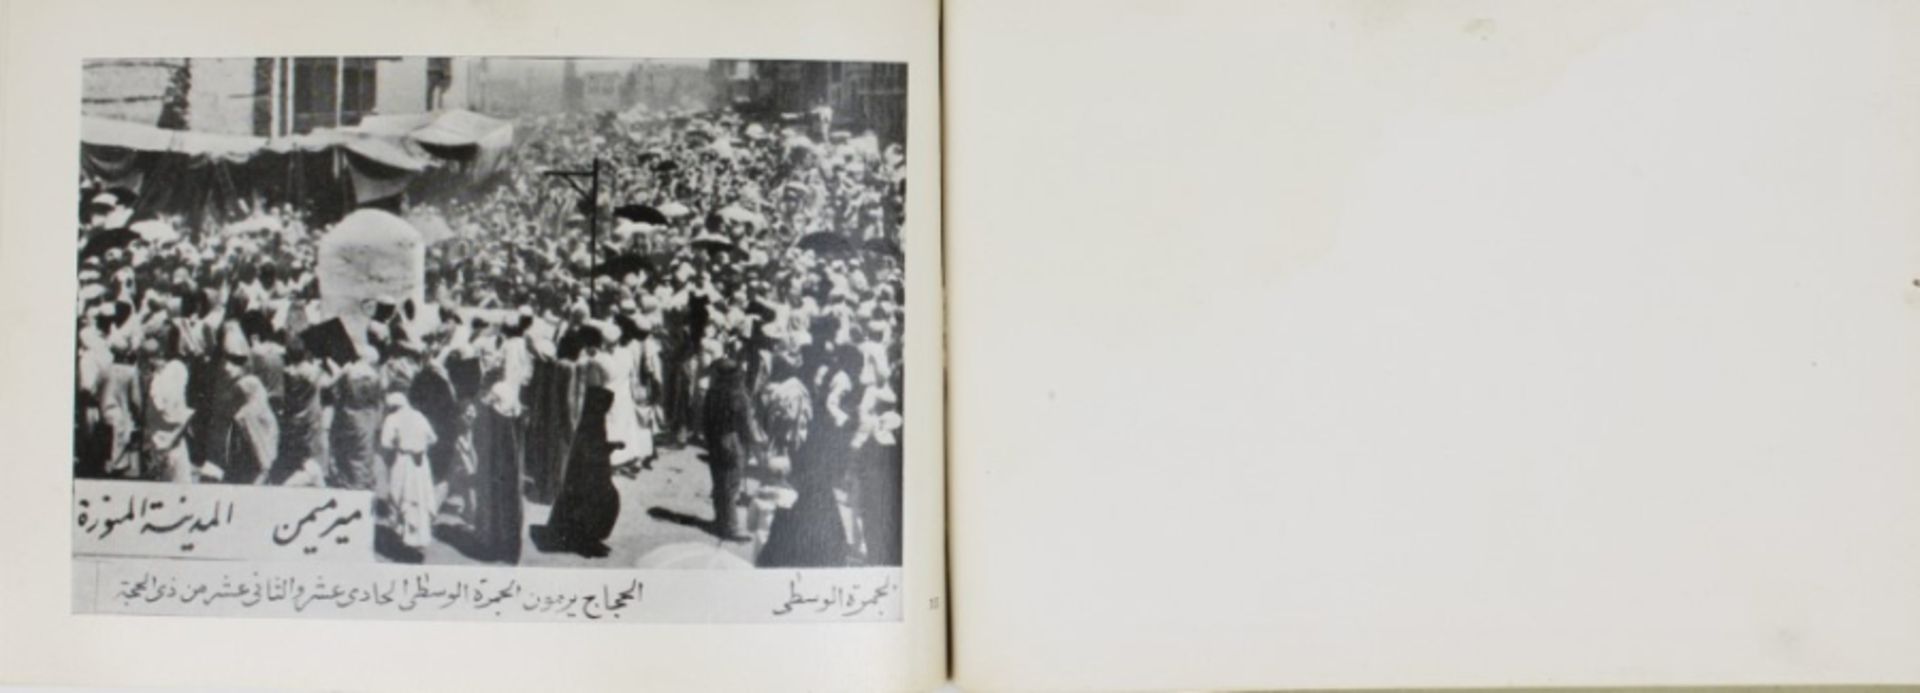 1930 Album with photographs of Mecca - Image 2 of 24